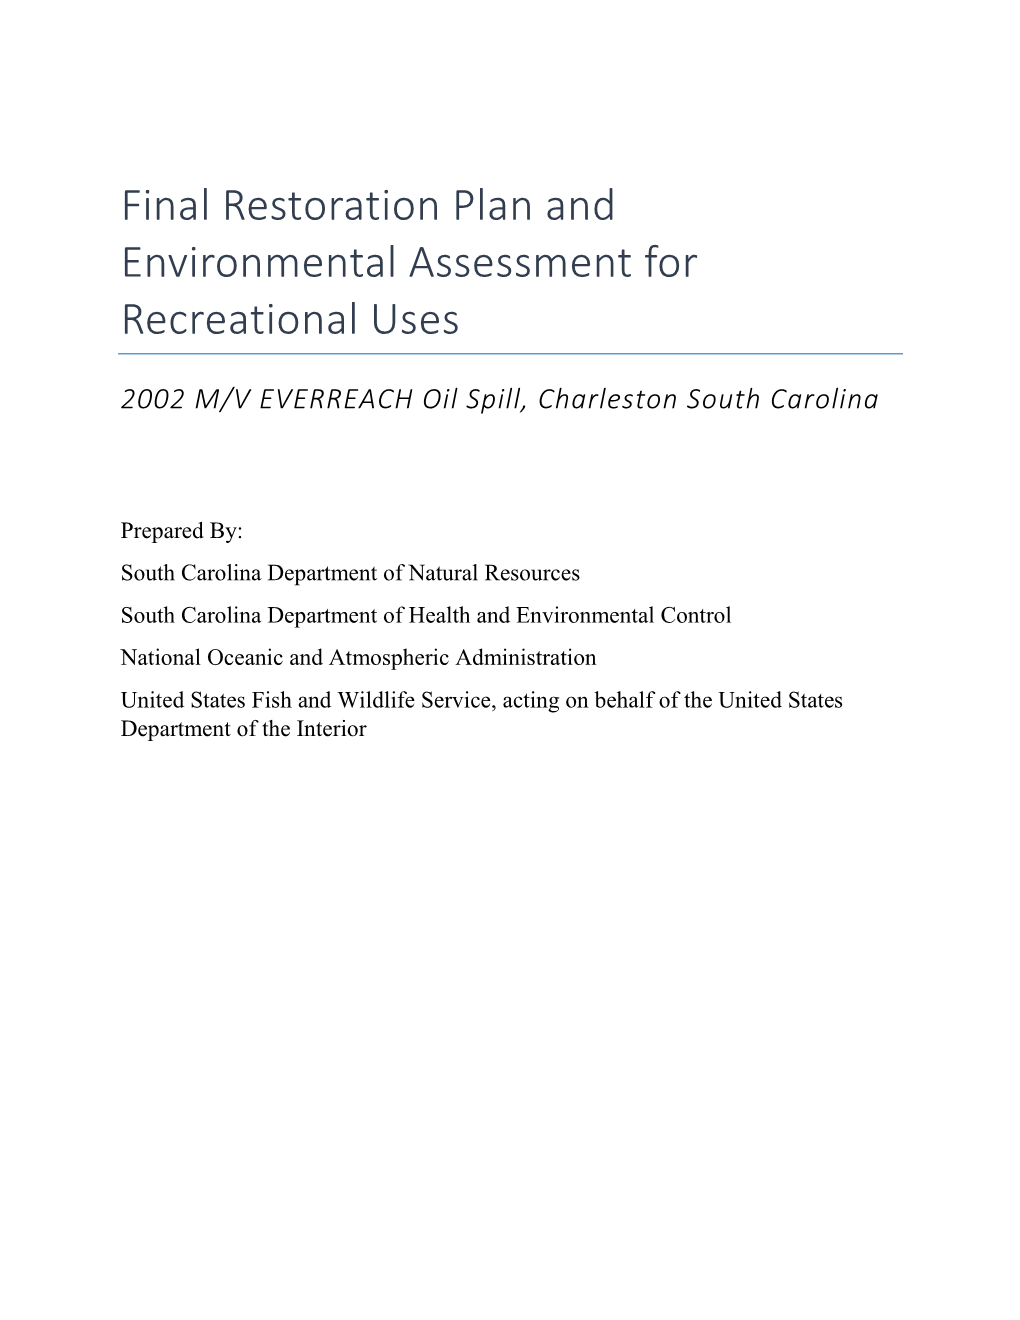 Final Restoration Plan and Environmental Assessment for Recreational Uses